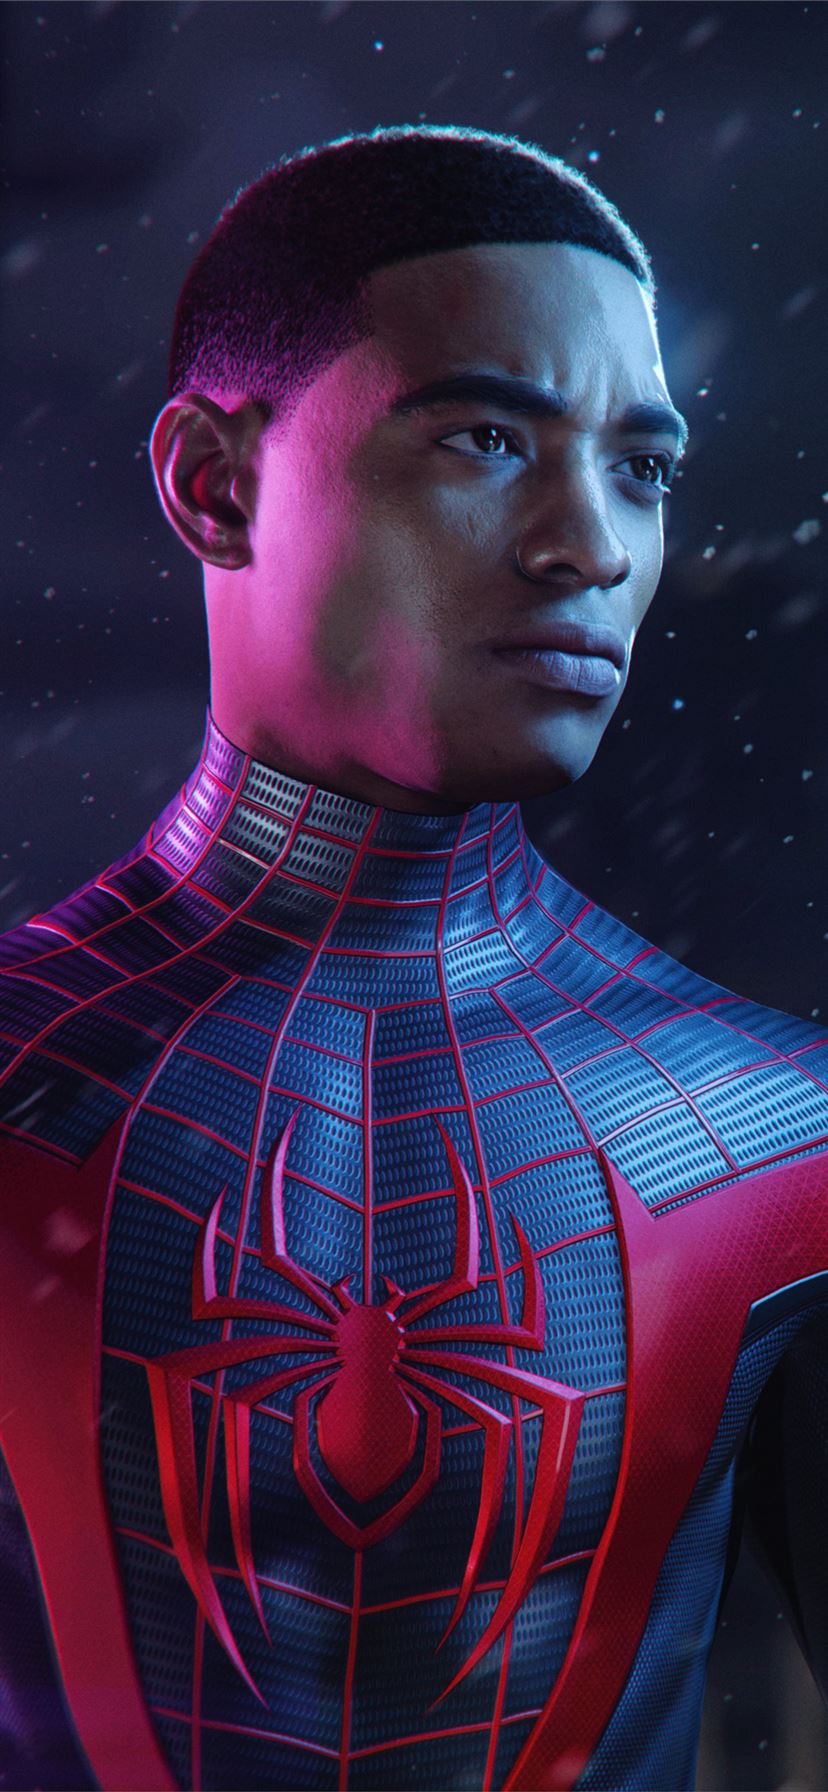 Marvels Spider Man Miles Morales PS5 Wallpapers